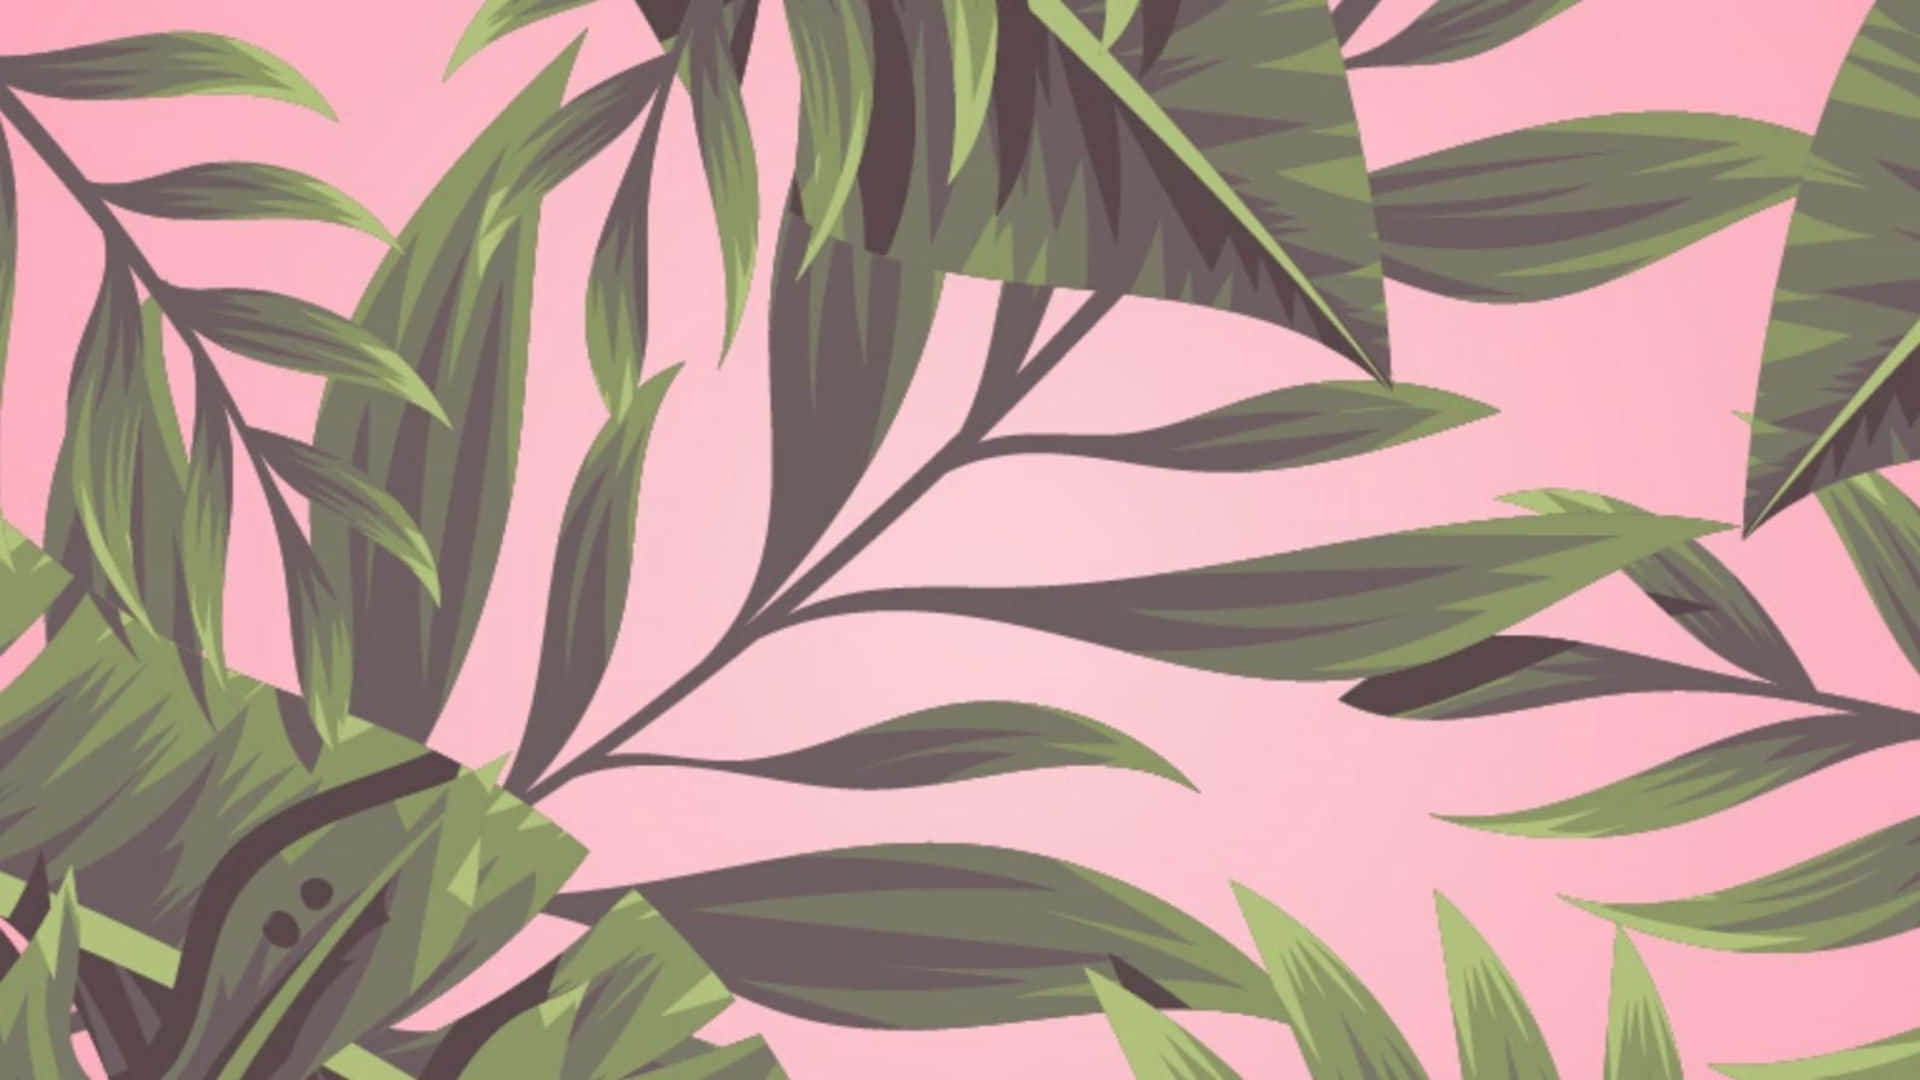 A Pink Background With Green Leaves On It